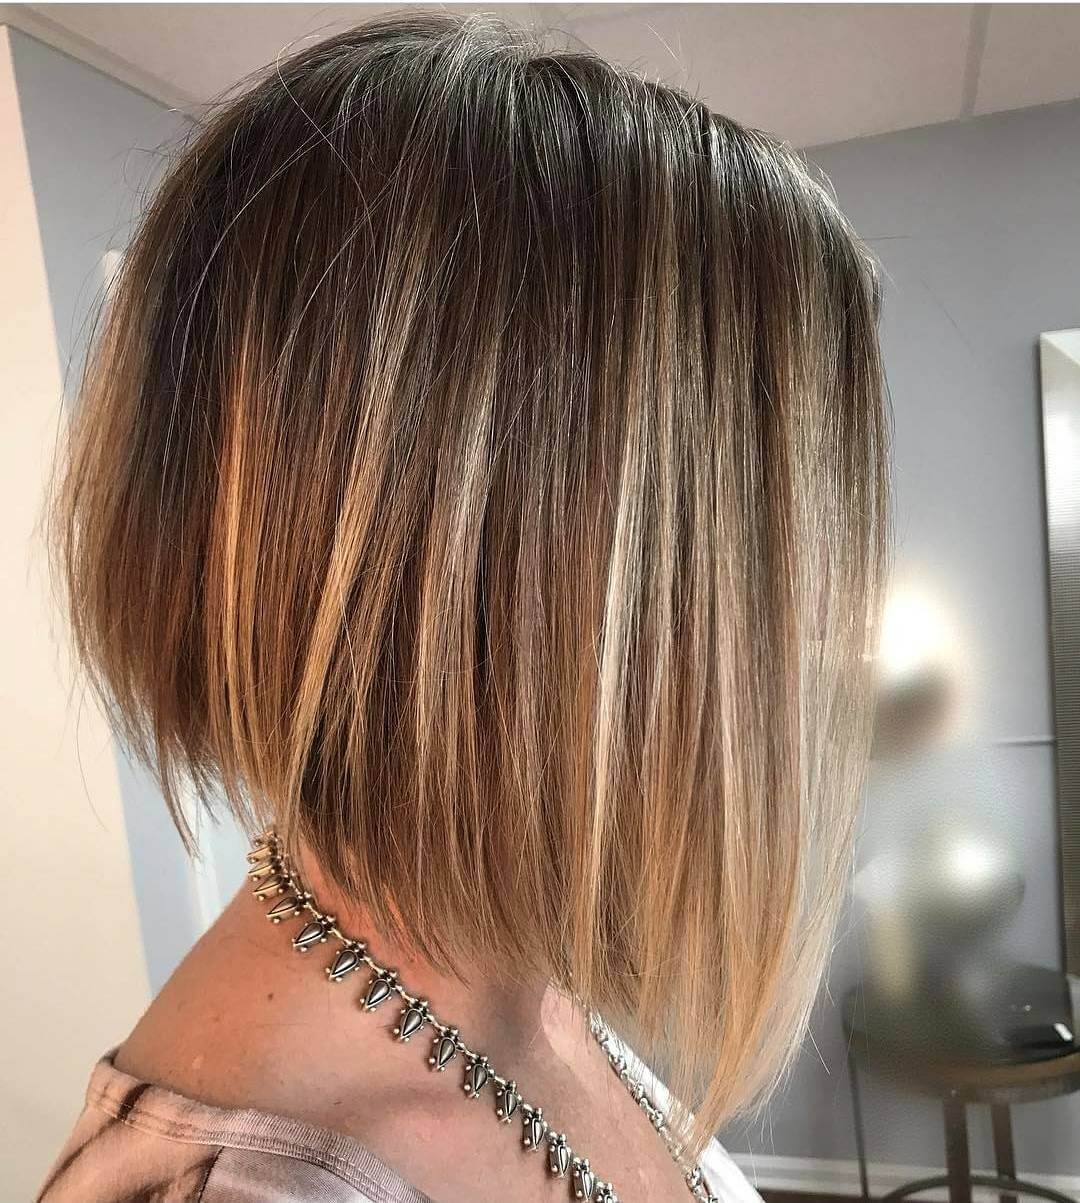 Amazing Short Haircut and Hair Style Ideas for Girls - Live Enhanced